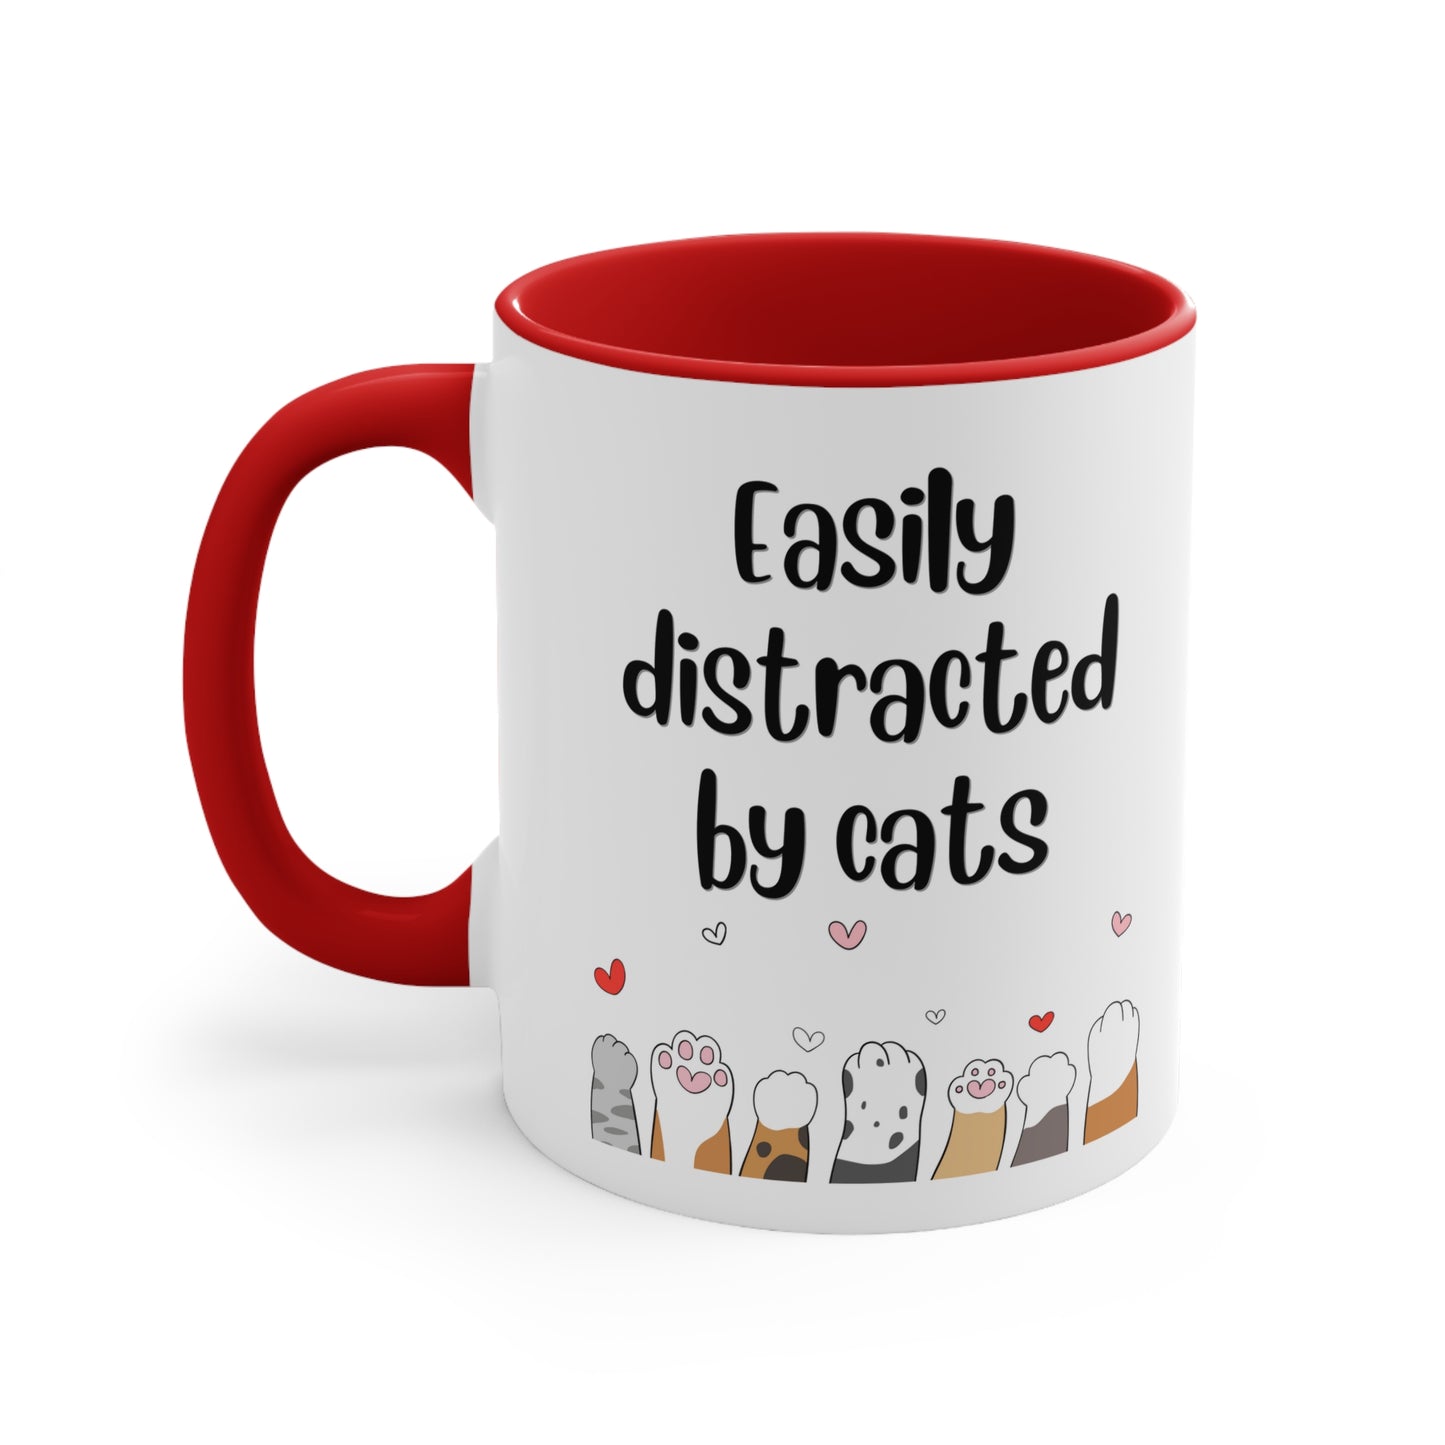 Easily Distracted by Cats Mug, 11oz